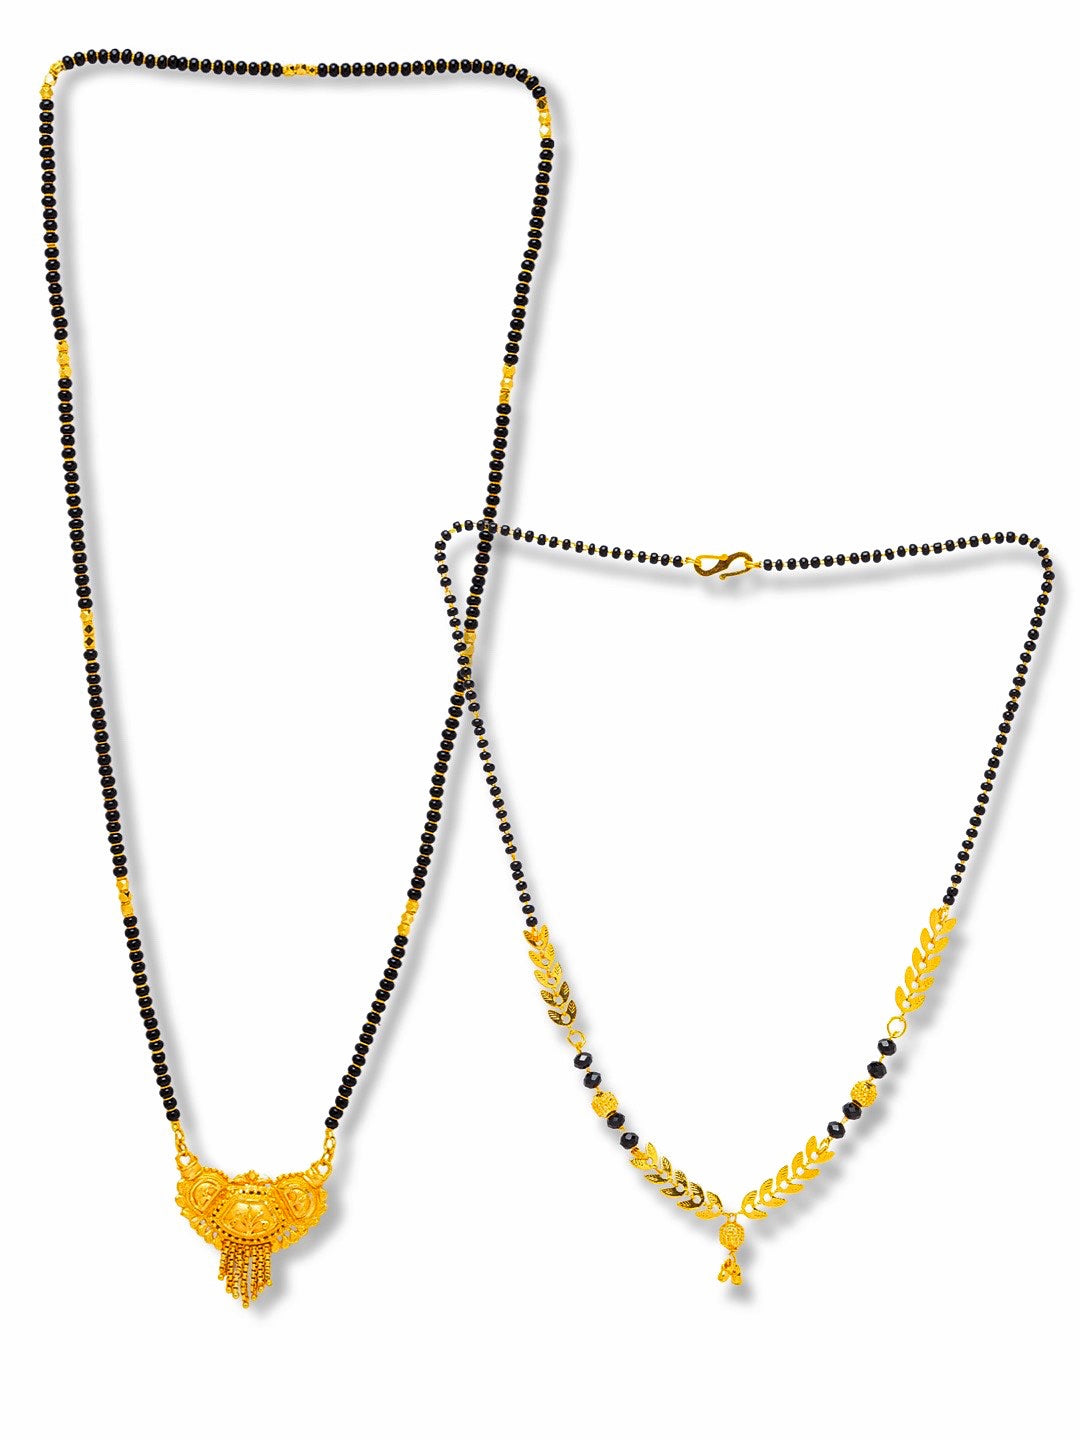 image for Combo Set of 2 Gold Plated Long Mangalsutra Designs and Short Mangalsutra Designs with Leaf Pendant